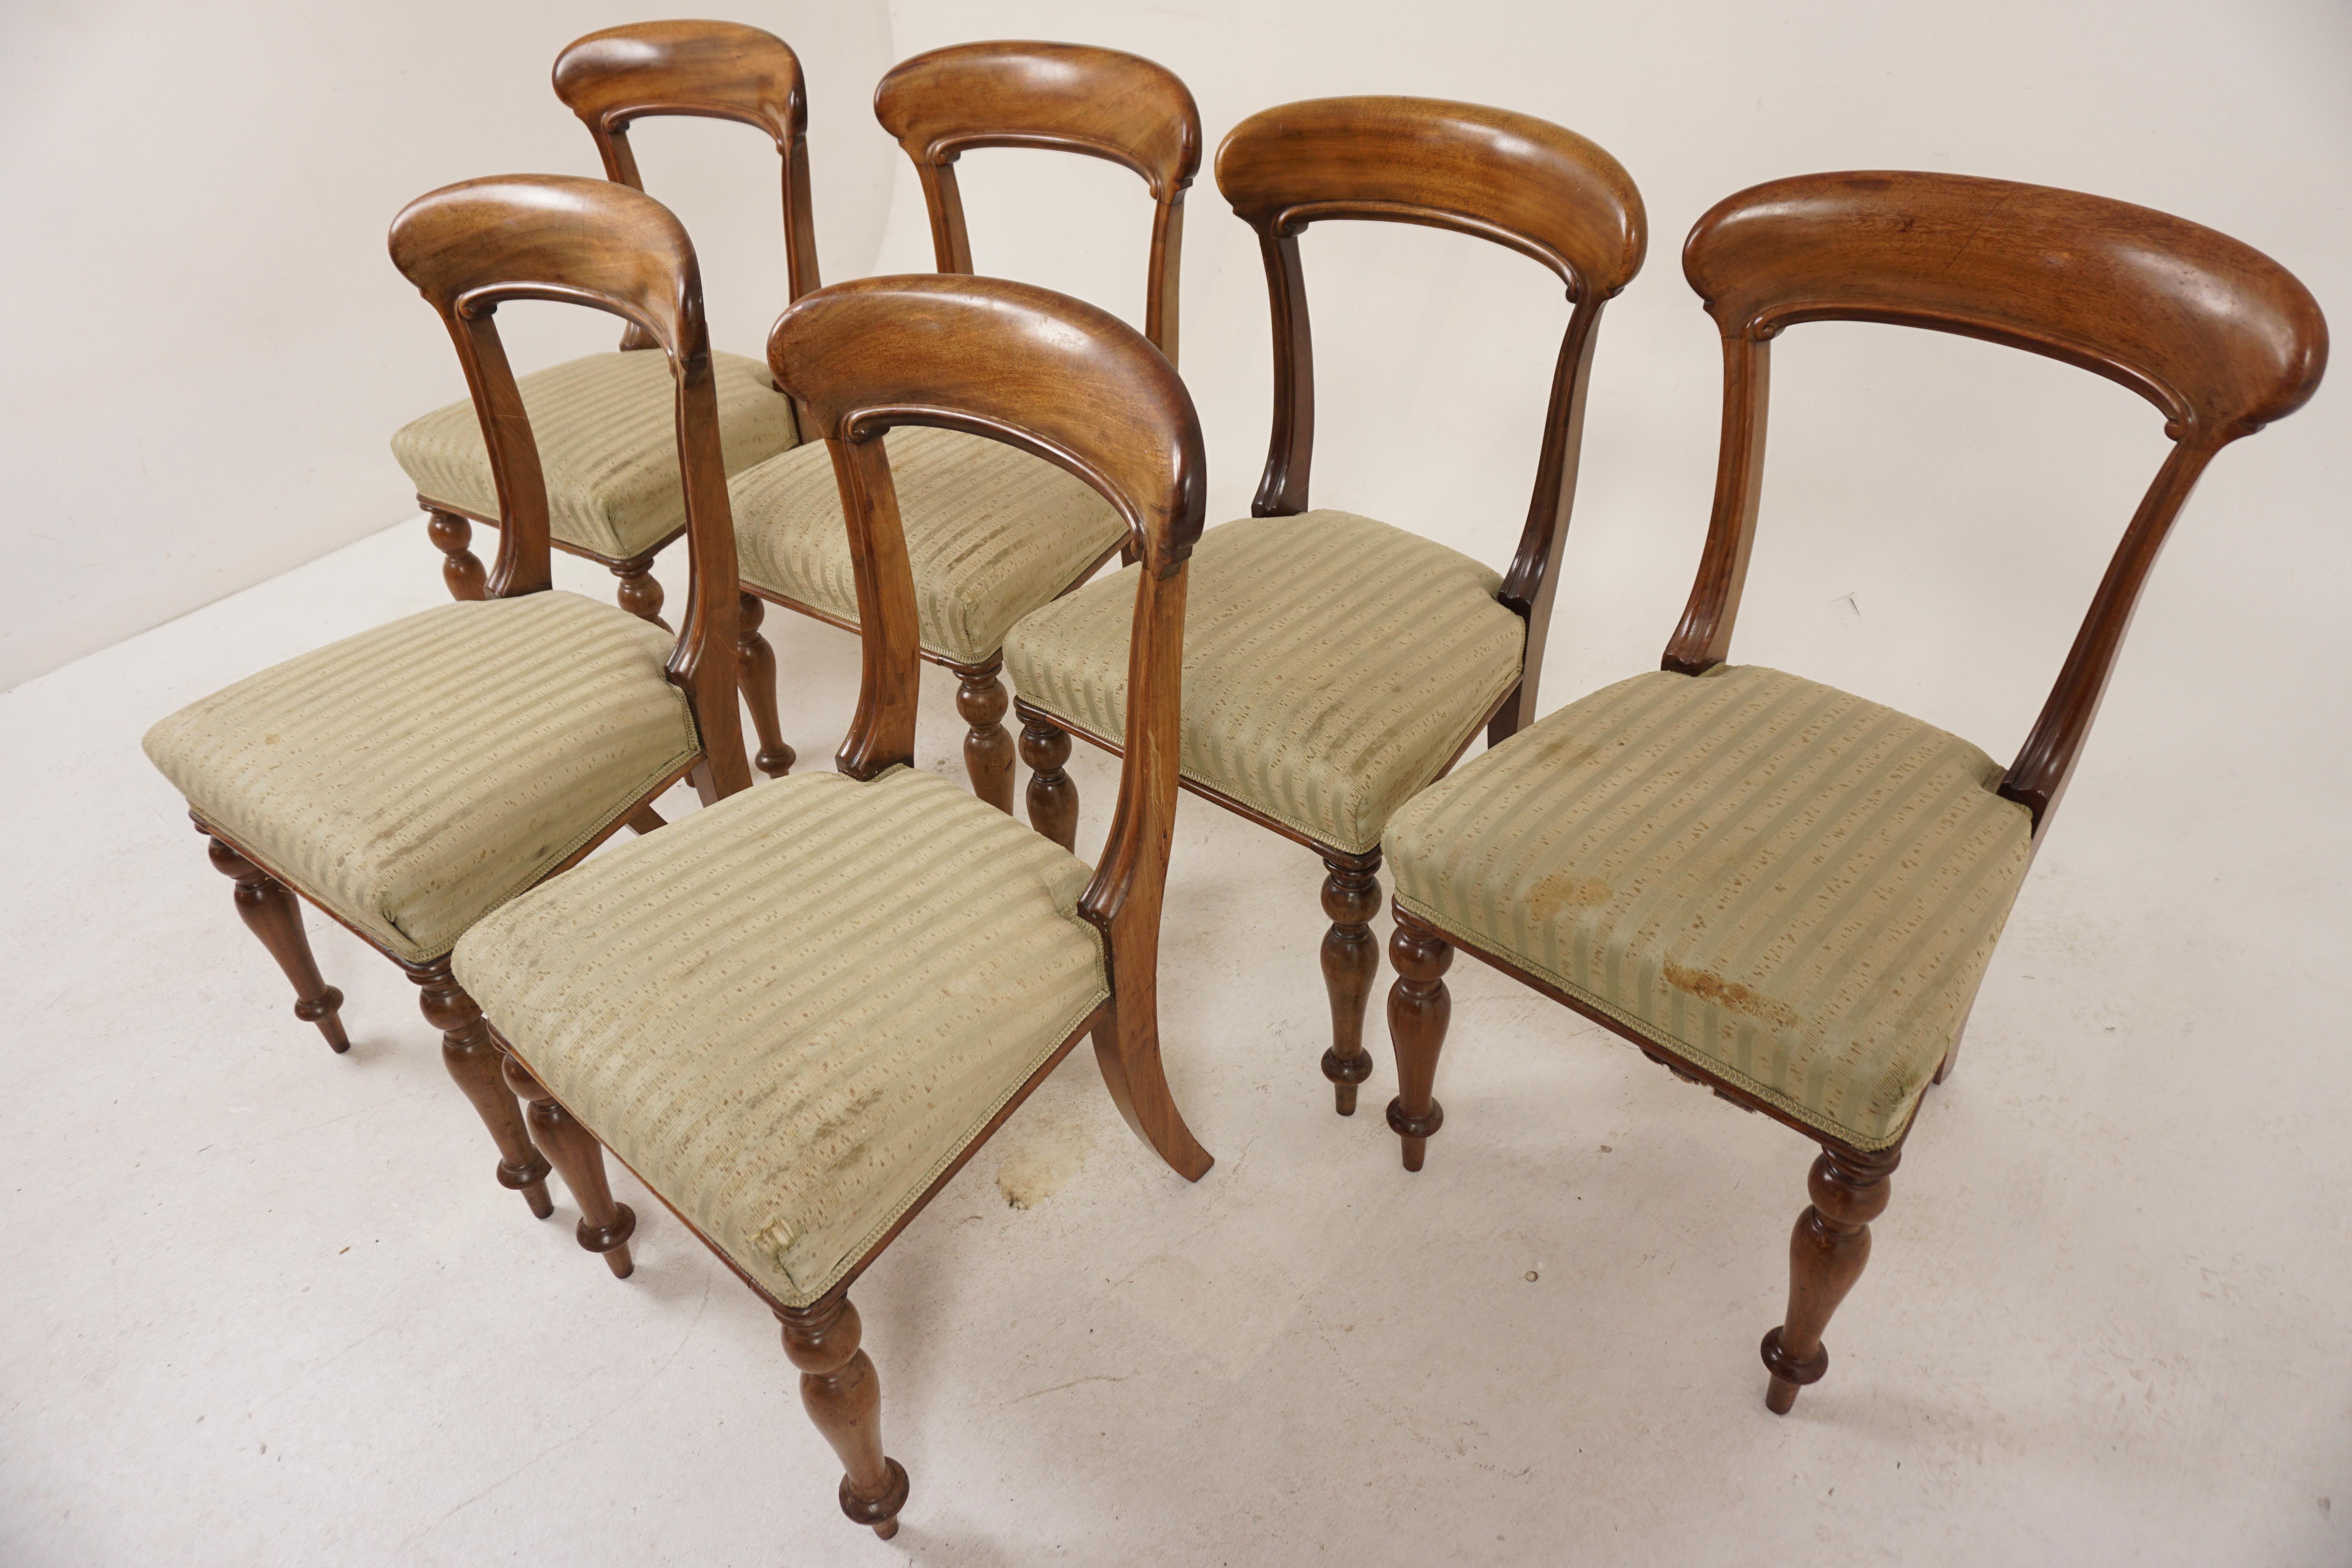 Set of 6 Victorian Walnut Upholstered Dining Chairs, Scotland 1860, H1190

Scotland 1860
Solid Walnut
Original finish
Large curved cresting rail on top with elegant scrolling beneath
Uprights with reeding which continues and tapers at the top